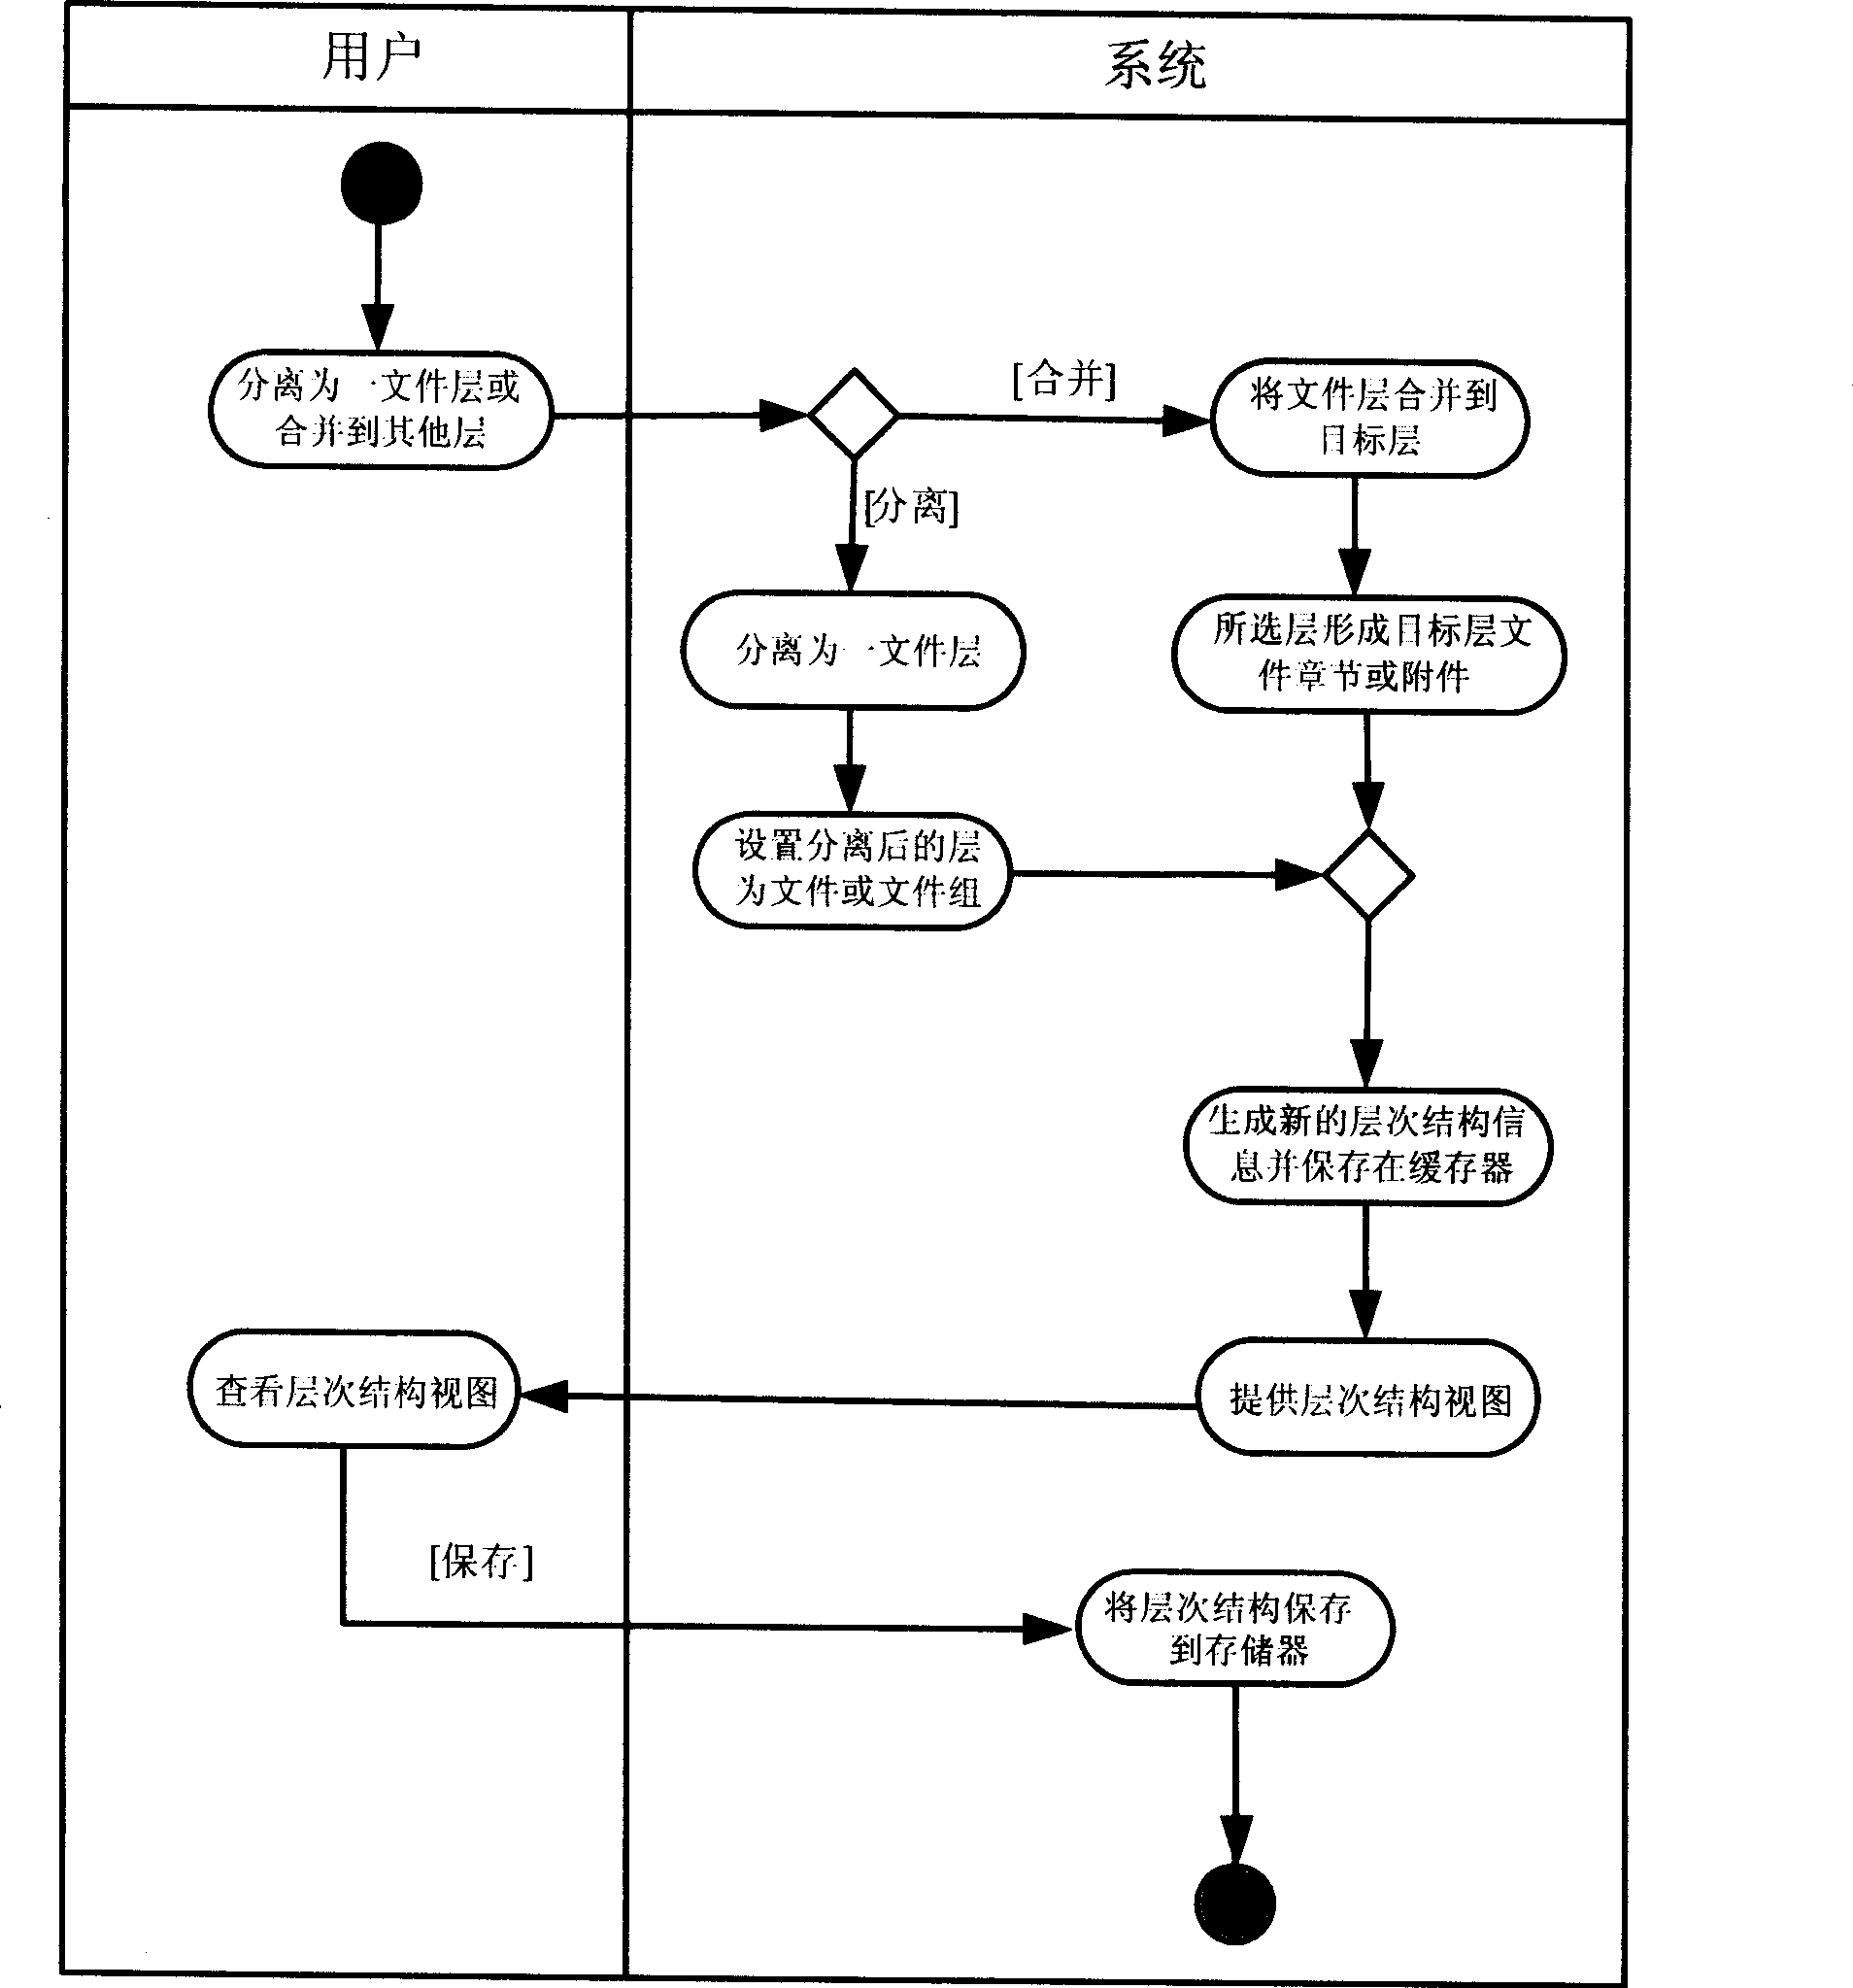 System and method for constructing management system